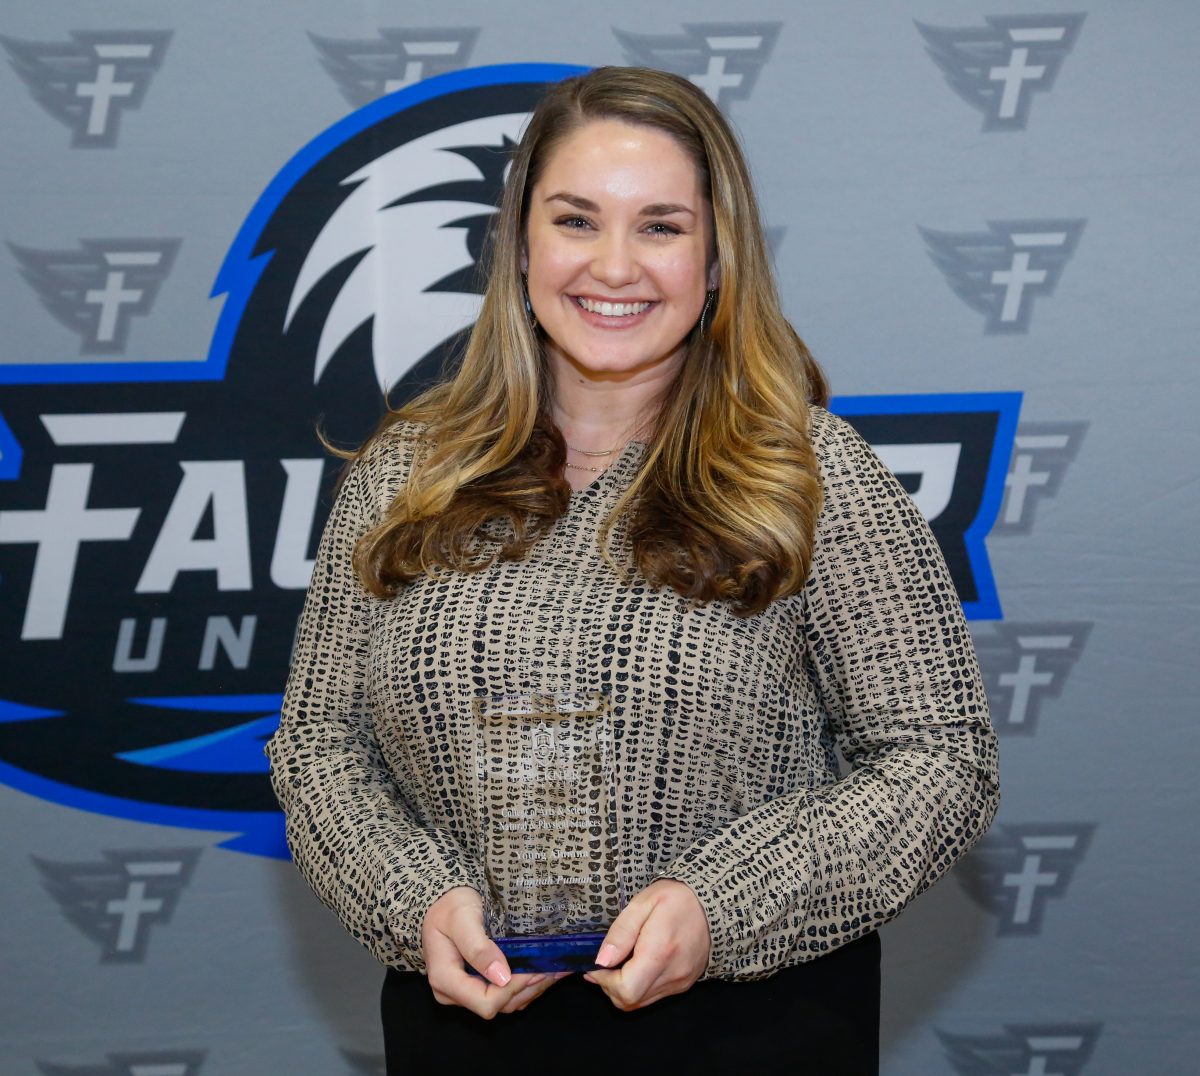 Hannah Putman stands with her award at the Marketplace Faith Friday Forums.As a microbiologist with the Alabama Department of Public Health, (ADPH) Faulkner alumna Hannah Putman is working to combat illnesses and make a positive difference in people's lives.  